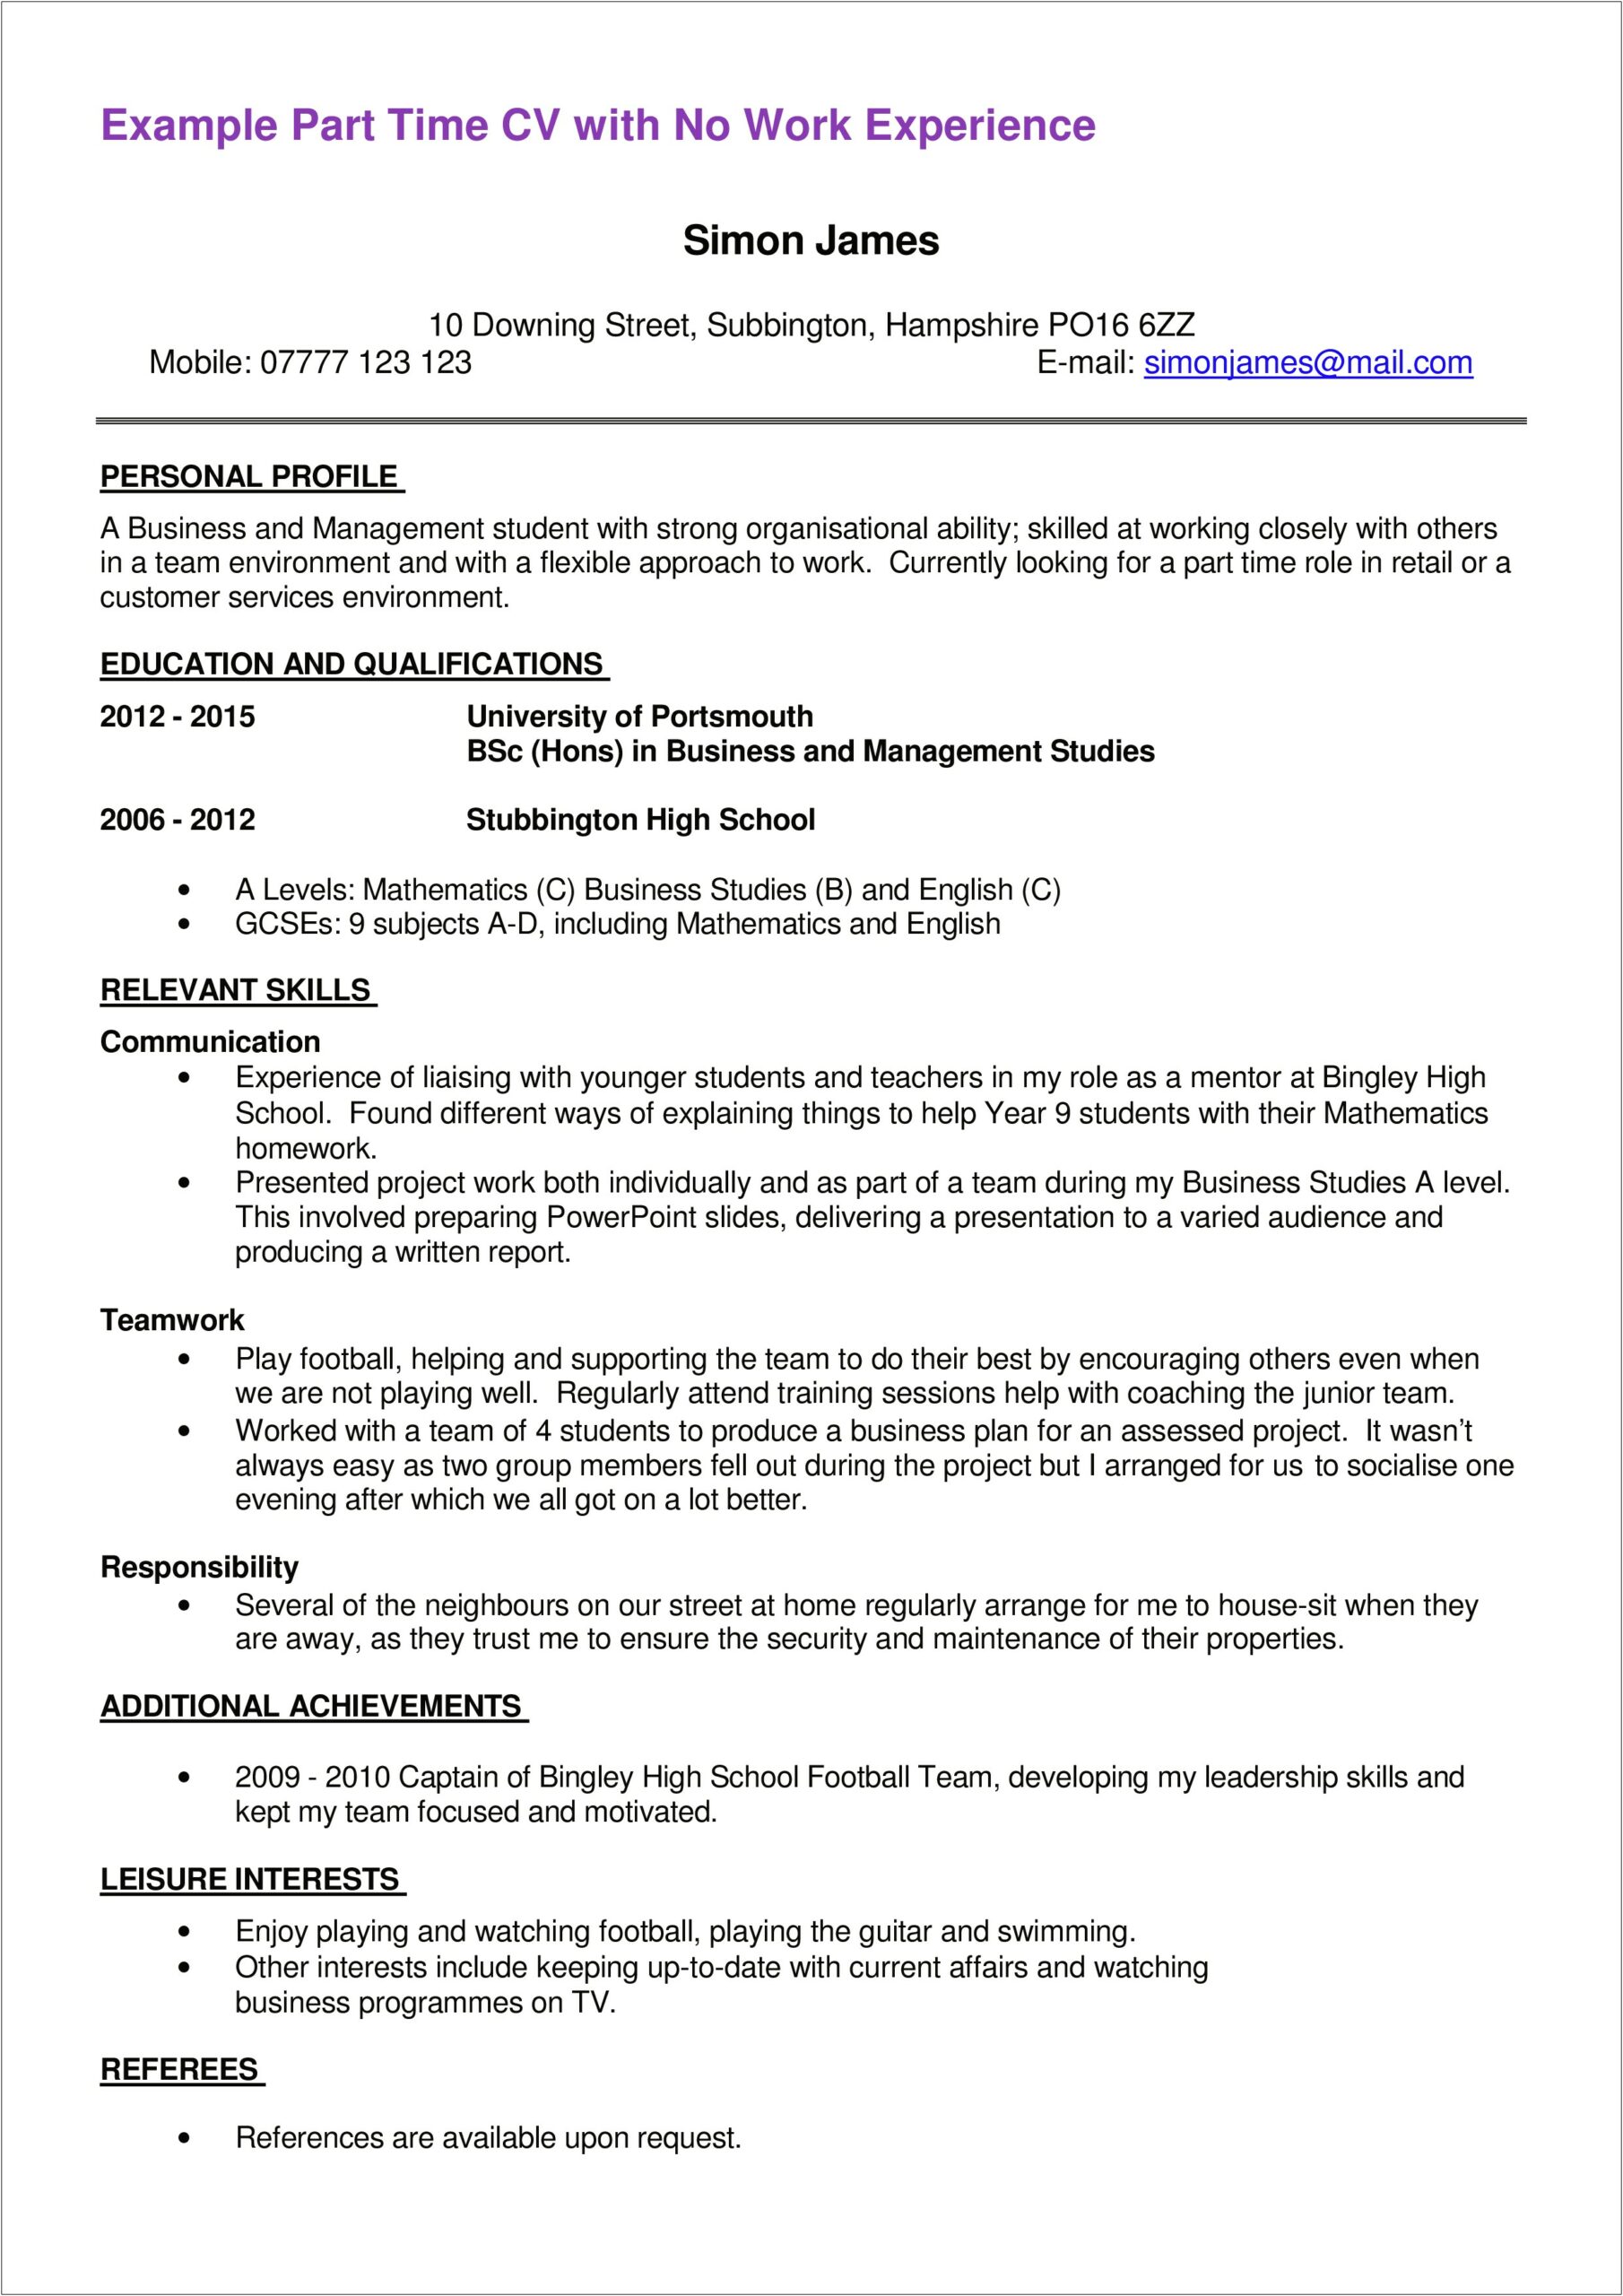 Resume For Student For Part Time Job